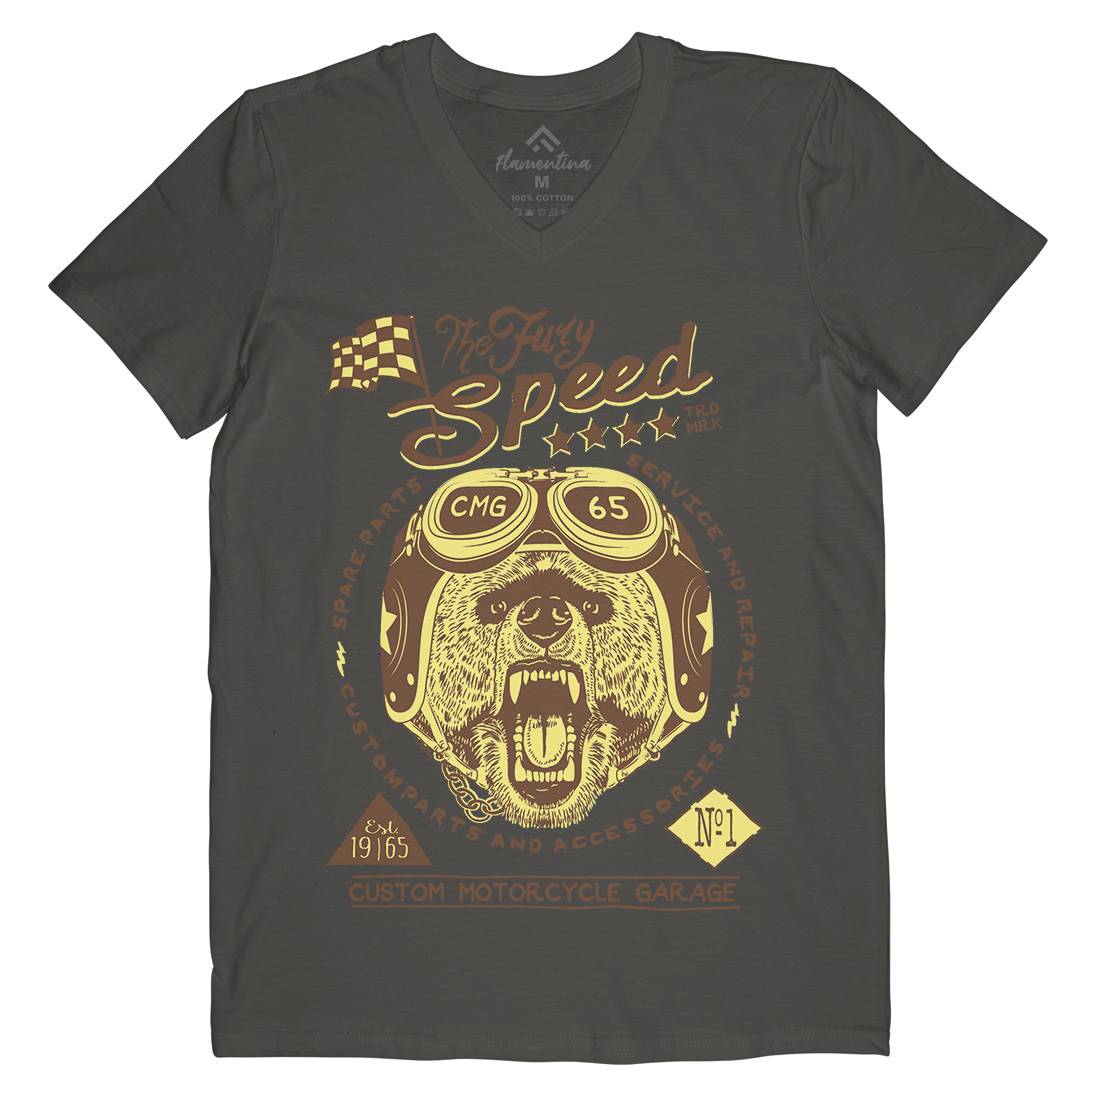 Fury Speed Mens V-Neck T-Shirt Motorcycles A997